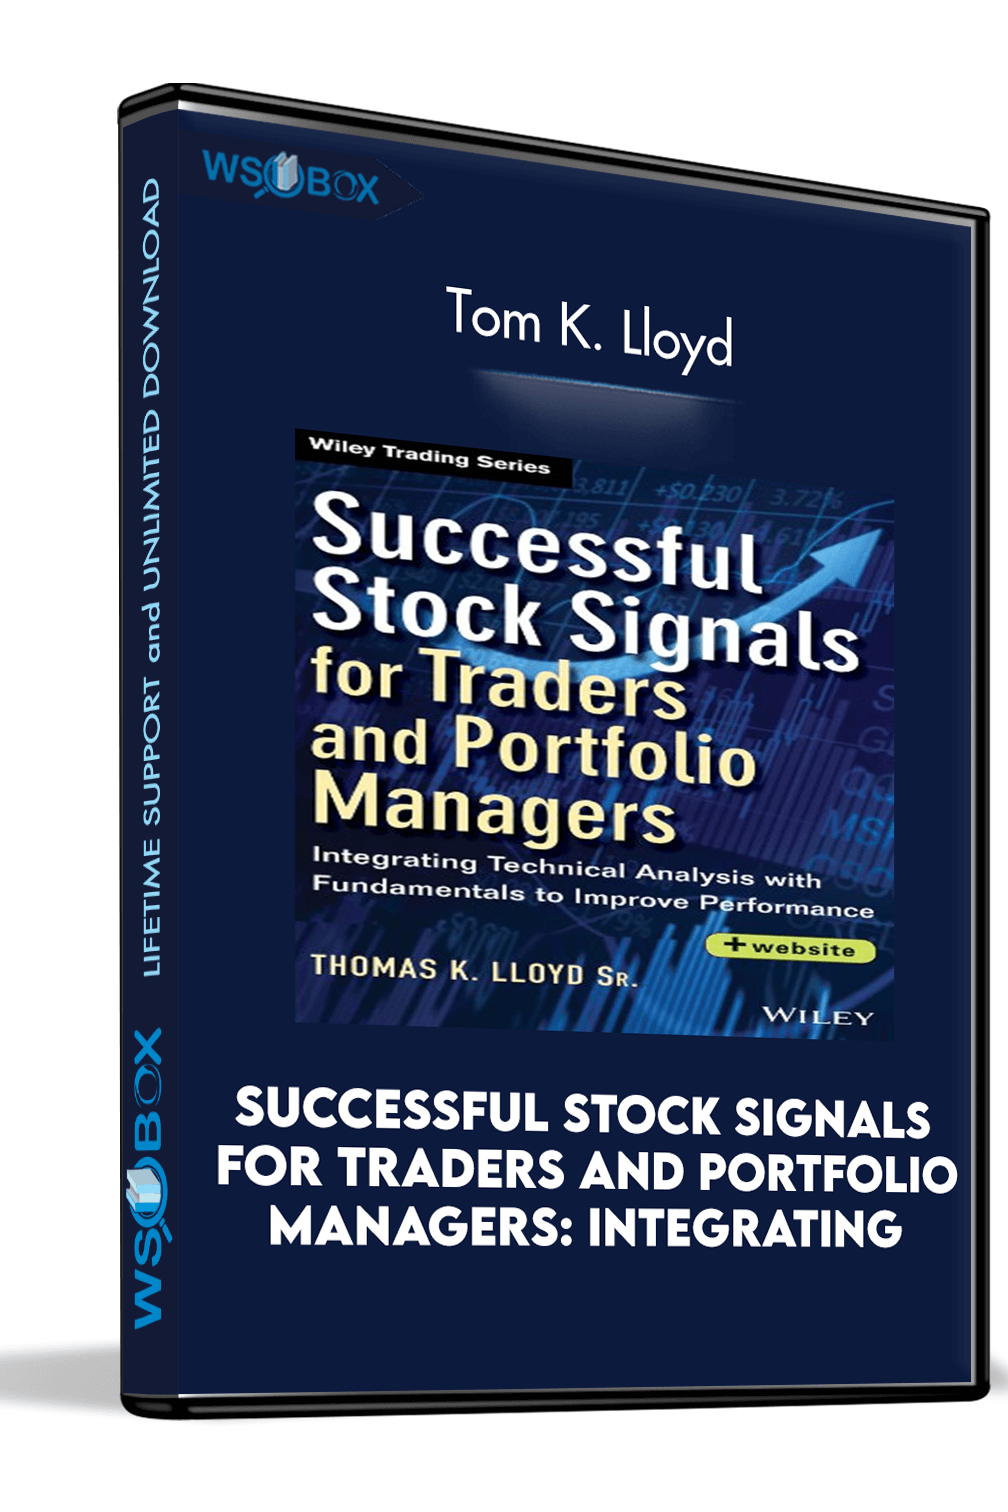 successful-stock-signals-for-traders-and-portfolio-managers-integrating-tom-k-lloyd